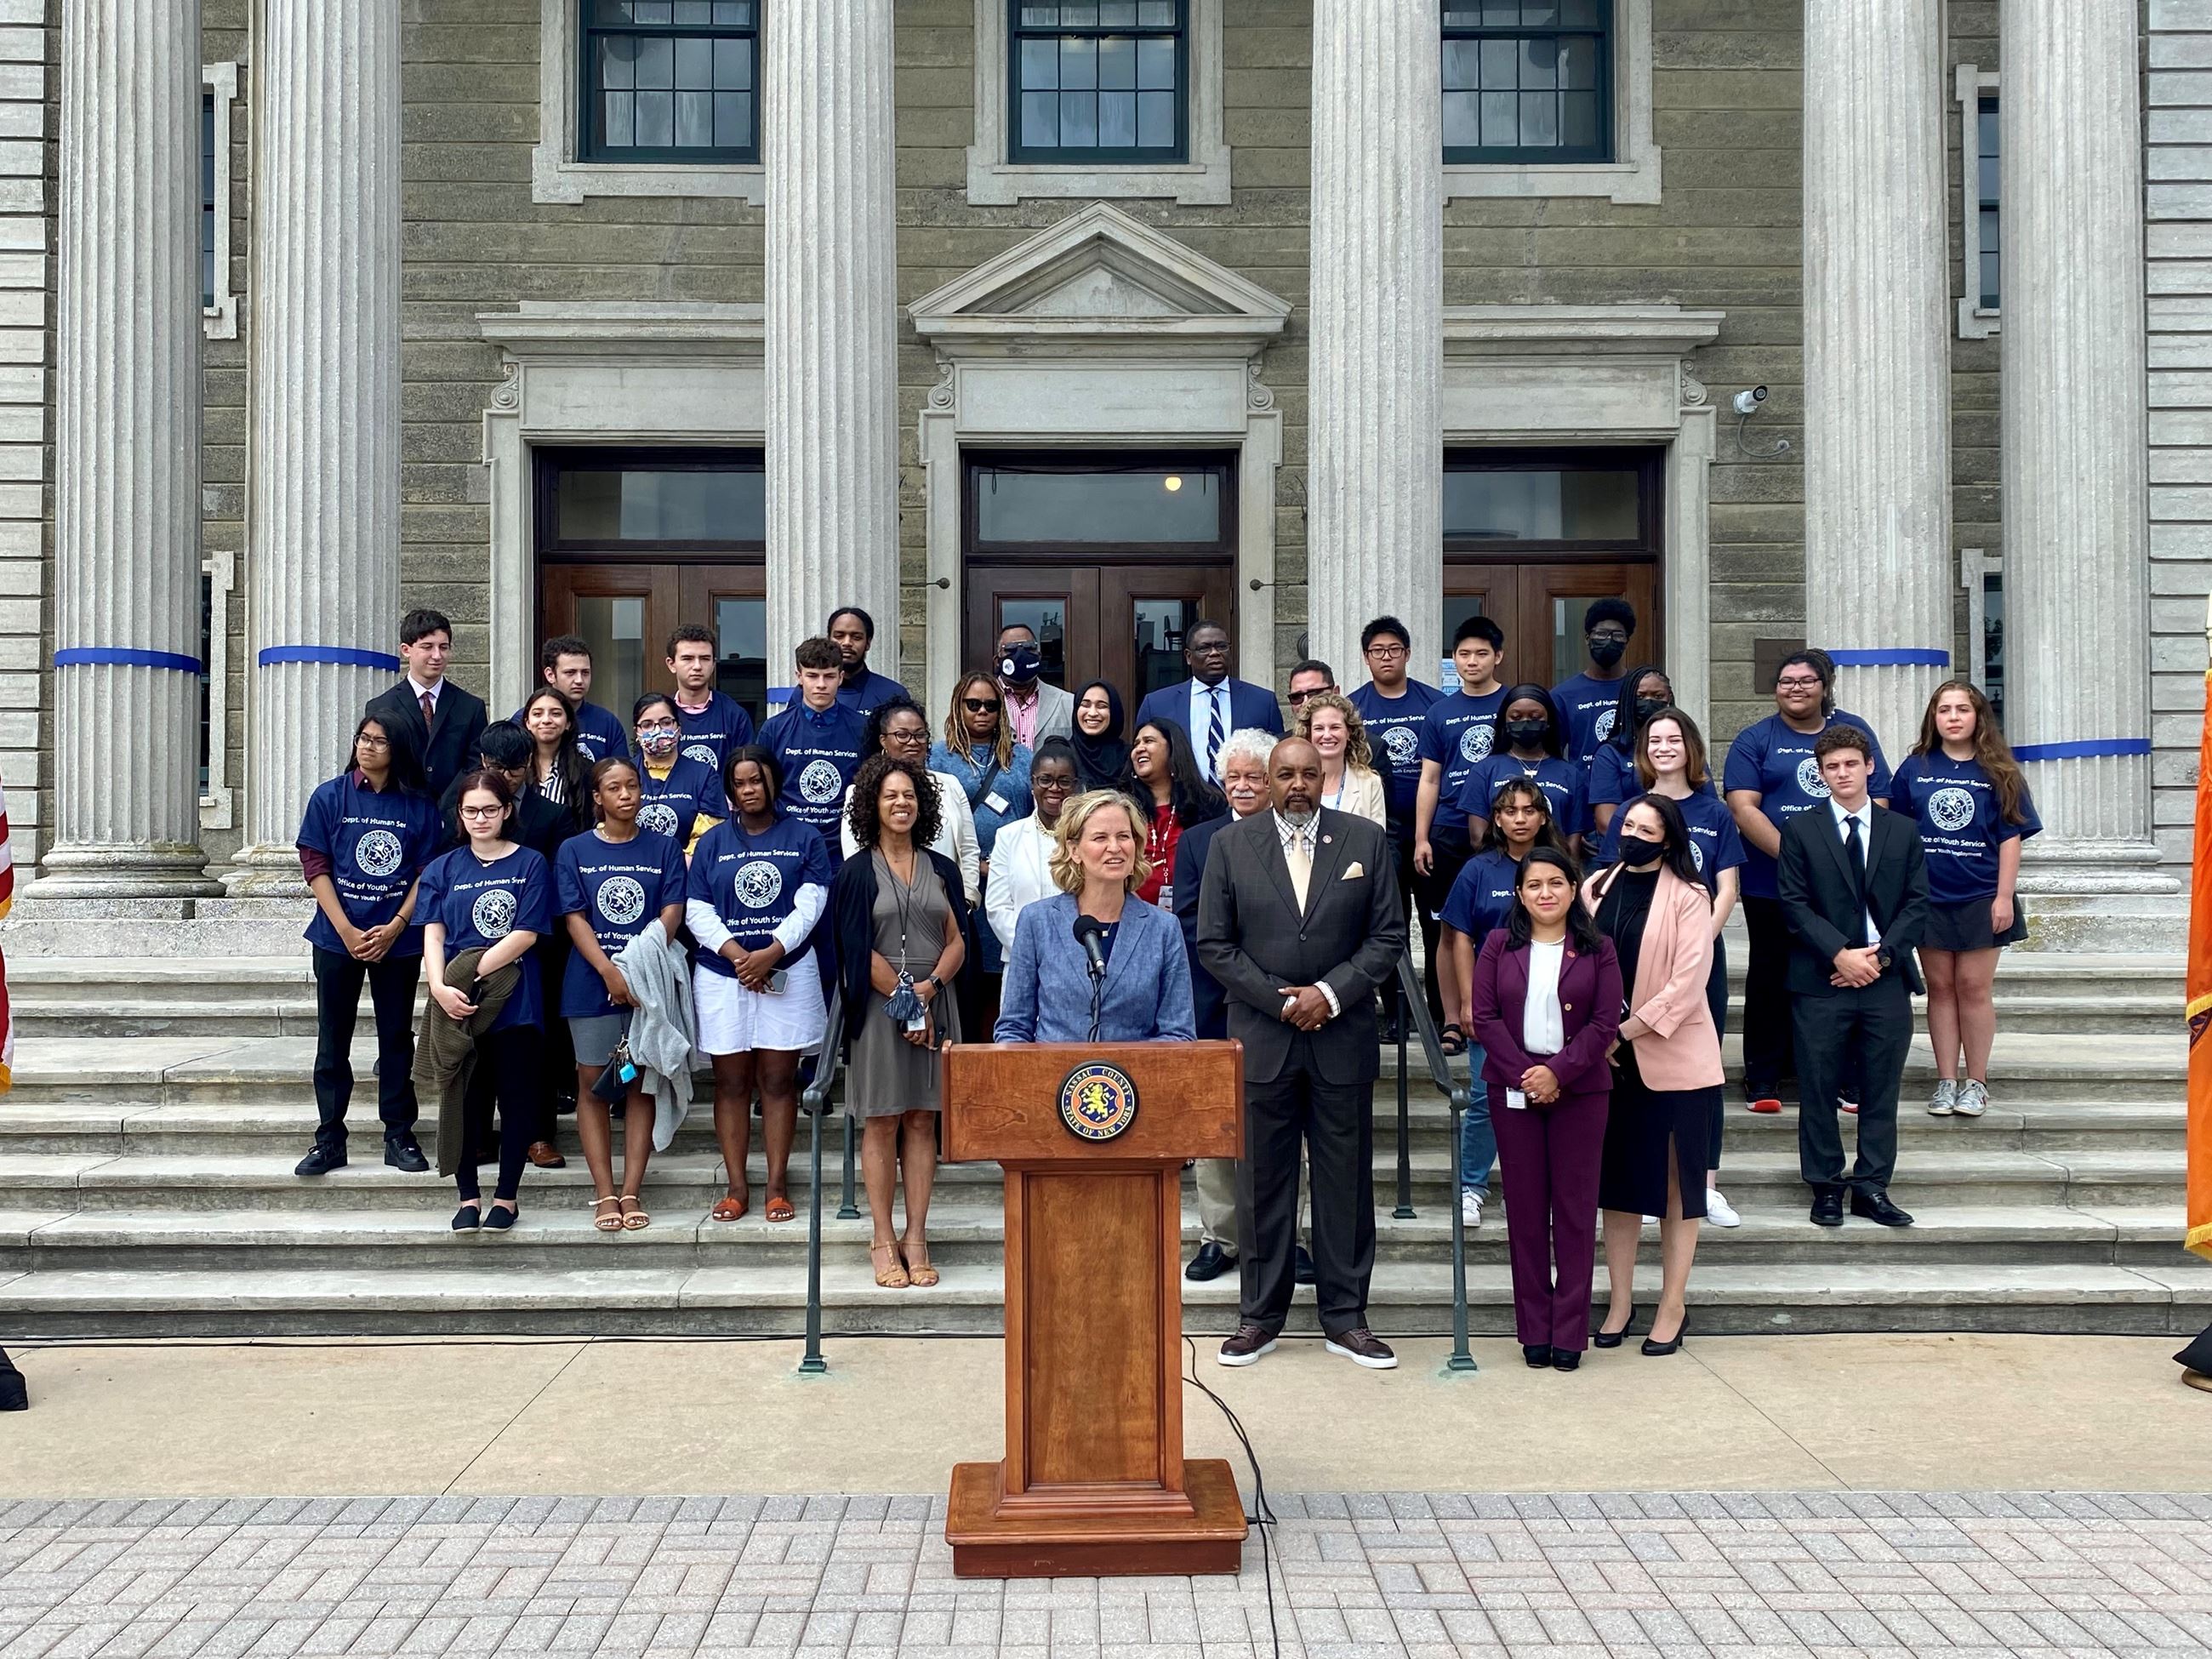 syep001 - Curran Announces Expanded Summer Youth Employment Program 